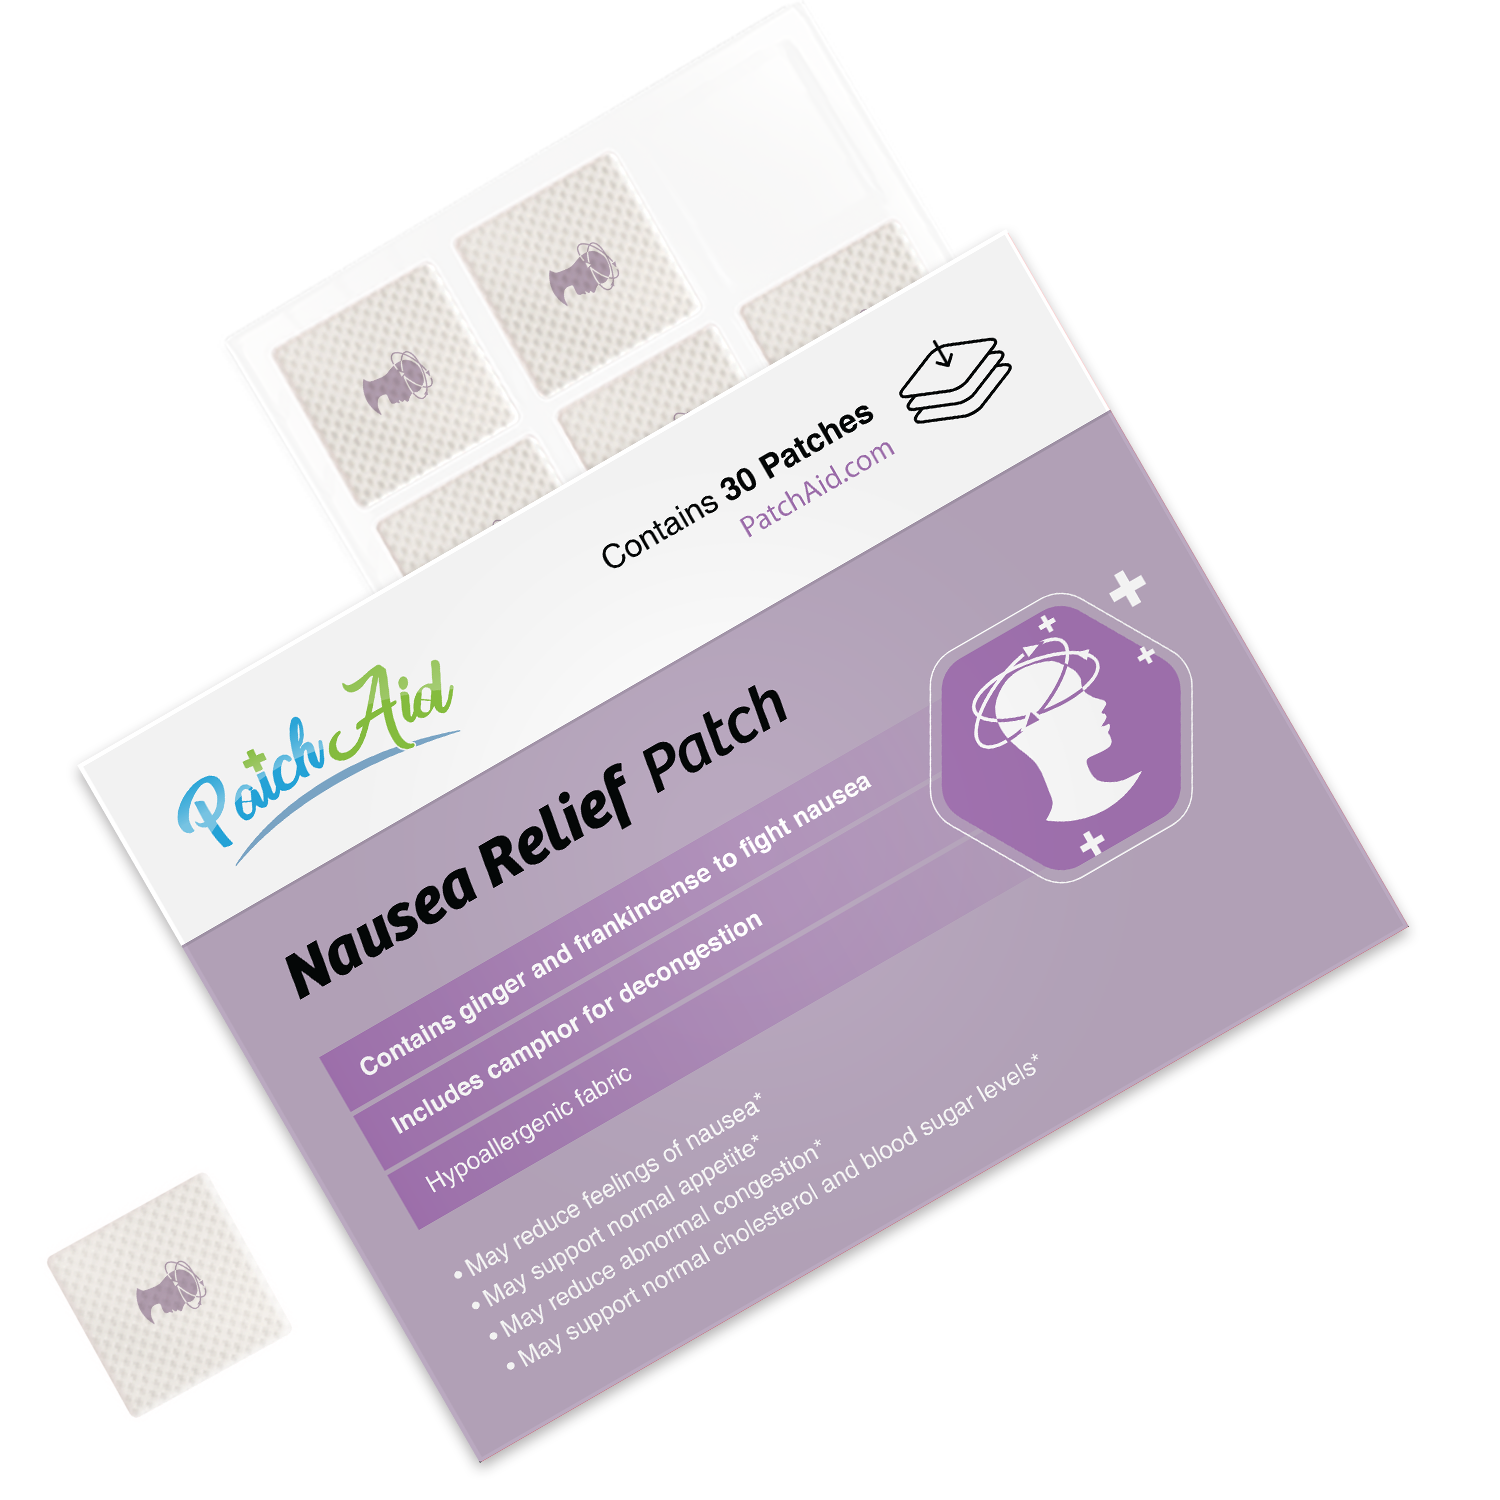 Nausea Relief Patch by PatchAid